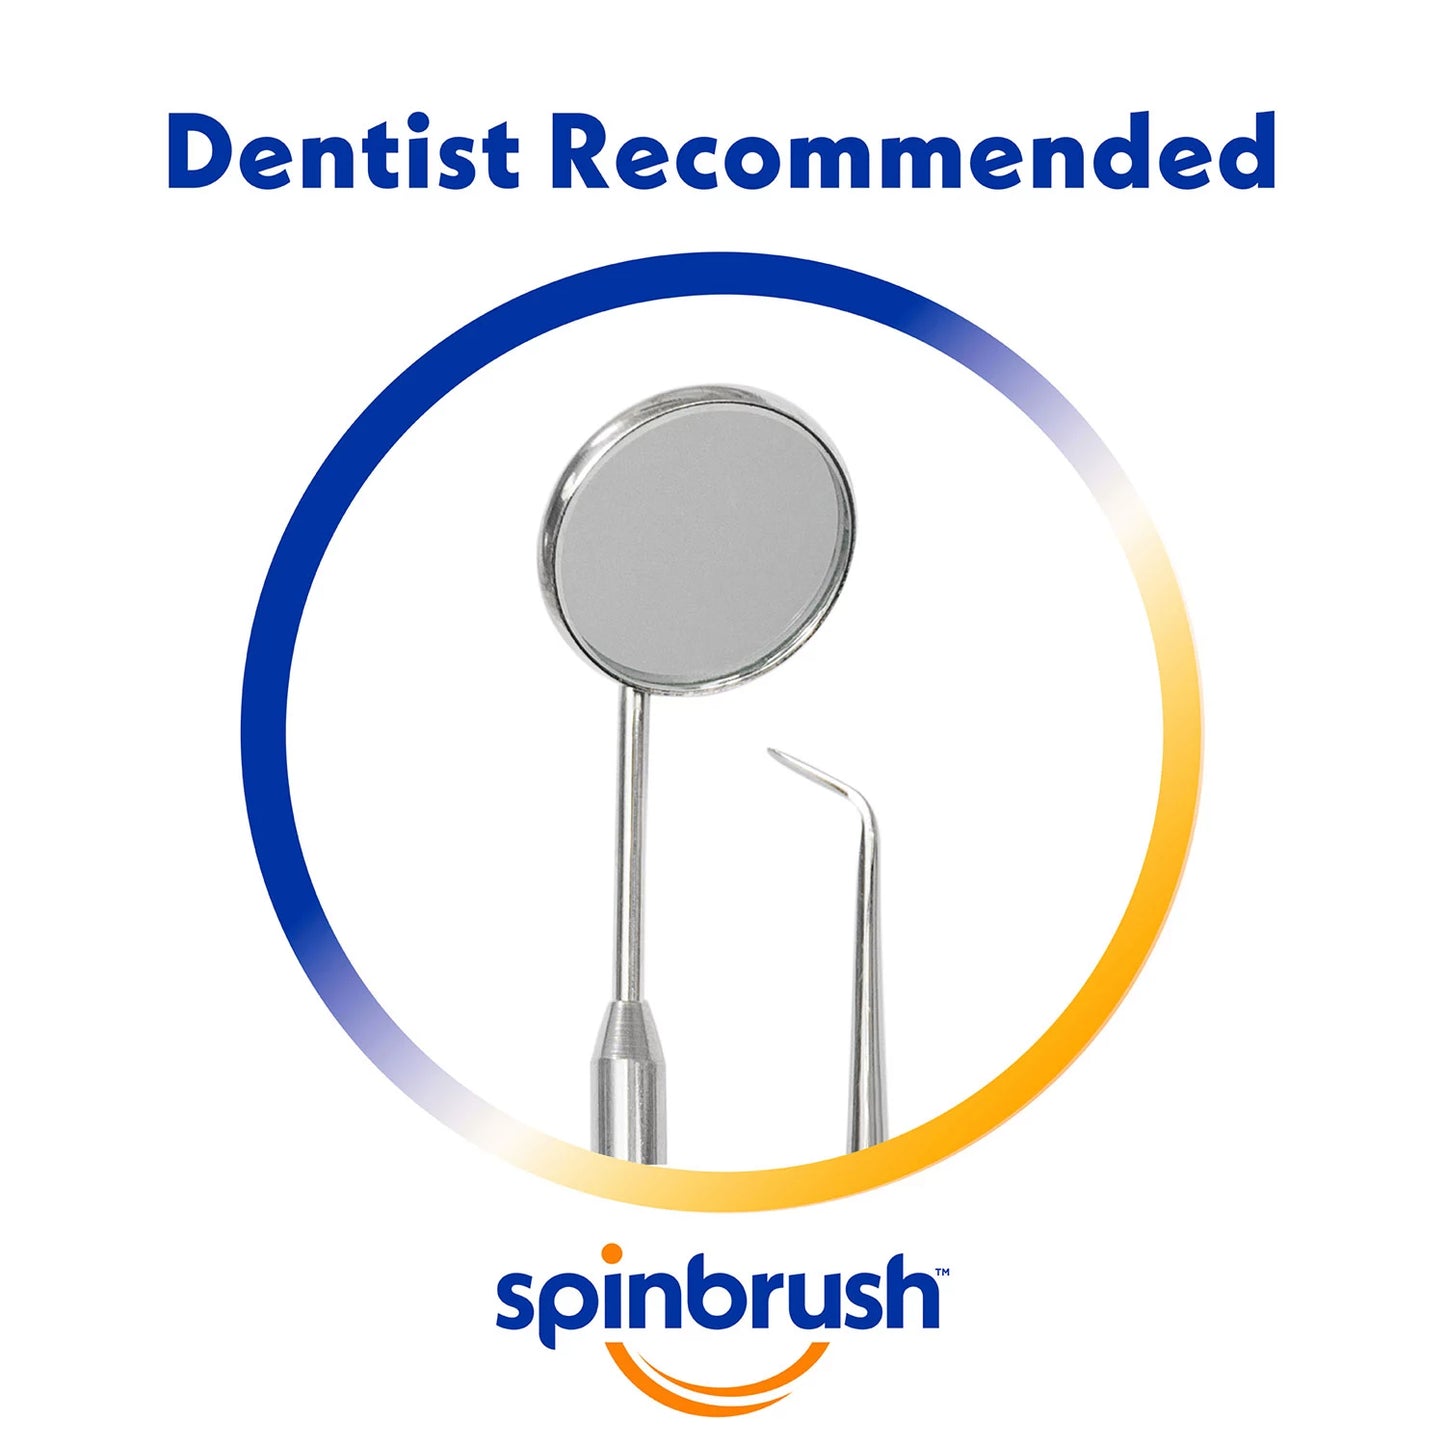 Spinbrush Pro+ Deep Clean Electric Toothbrush, Soft